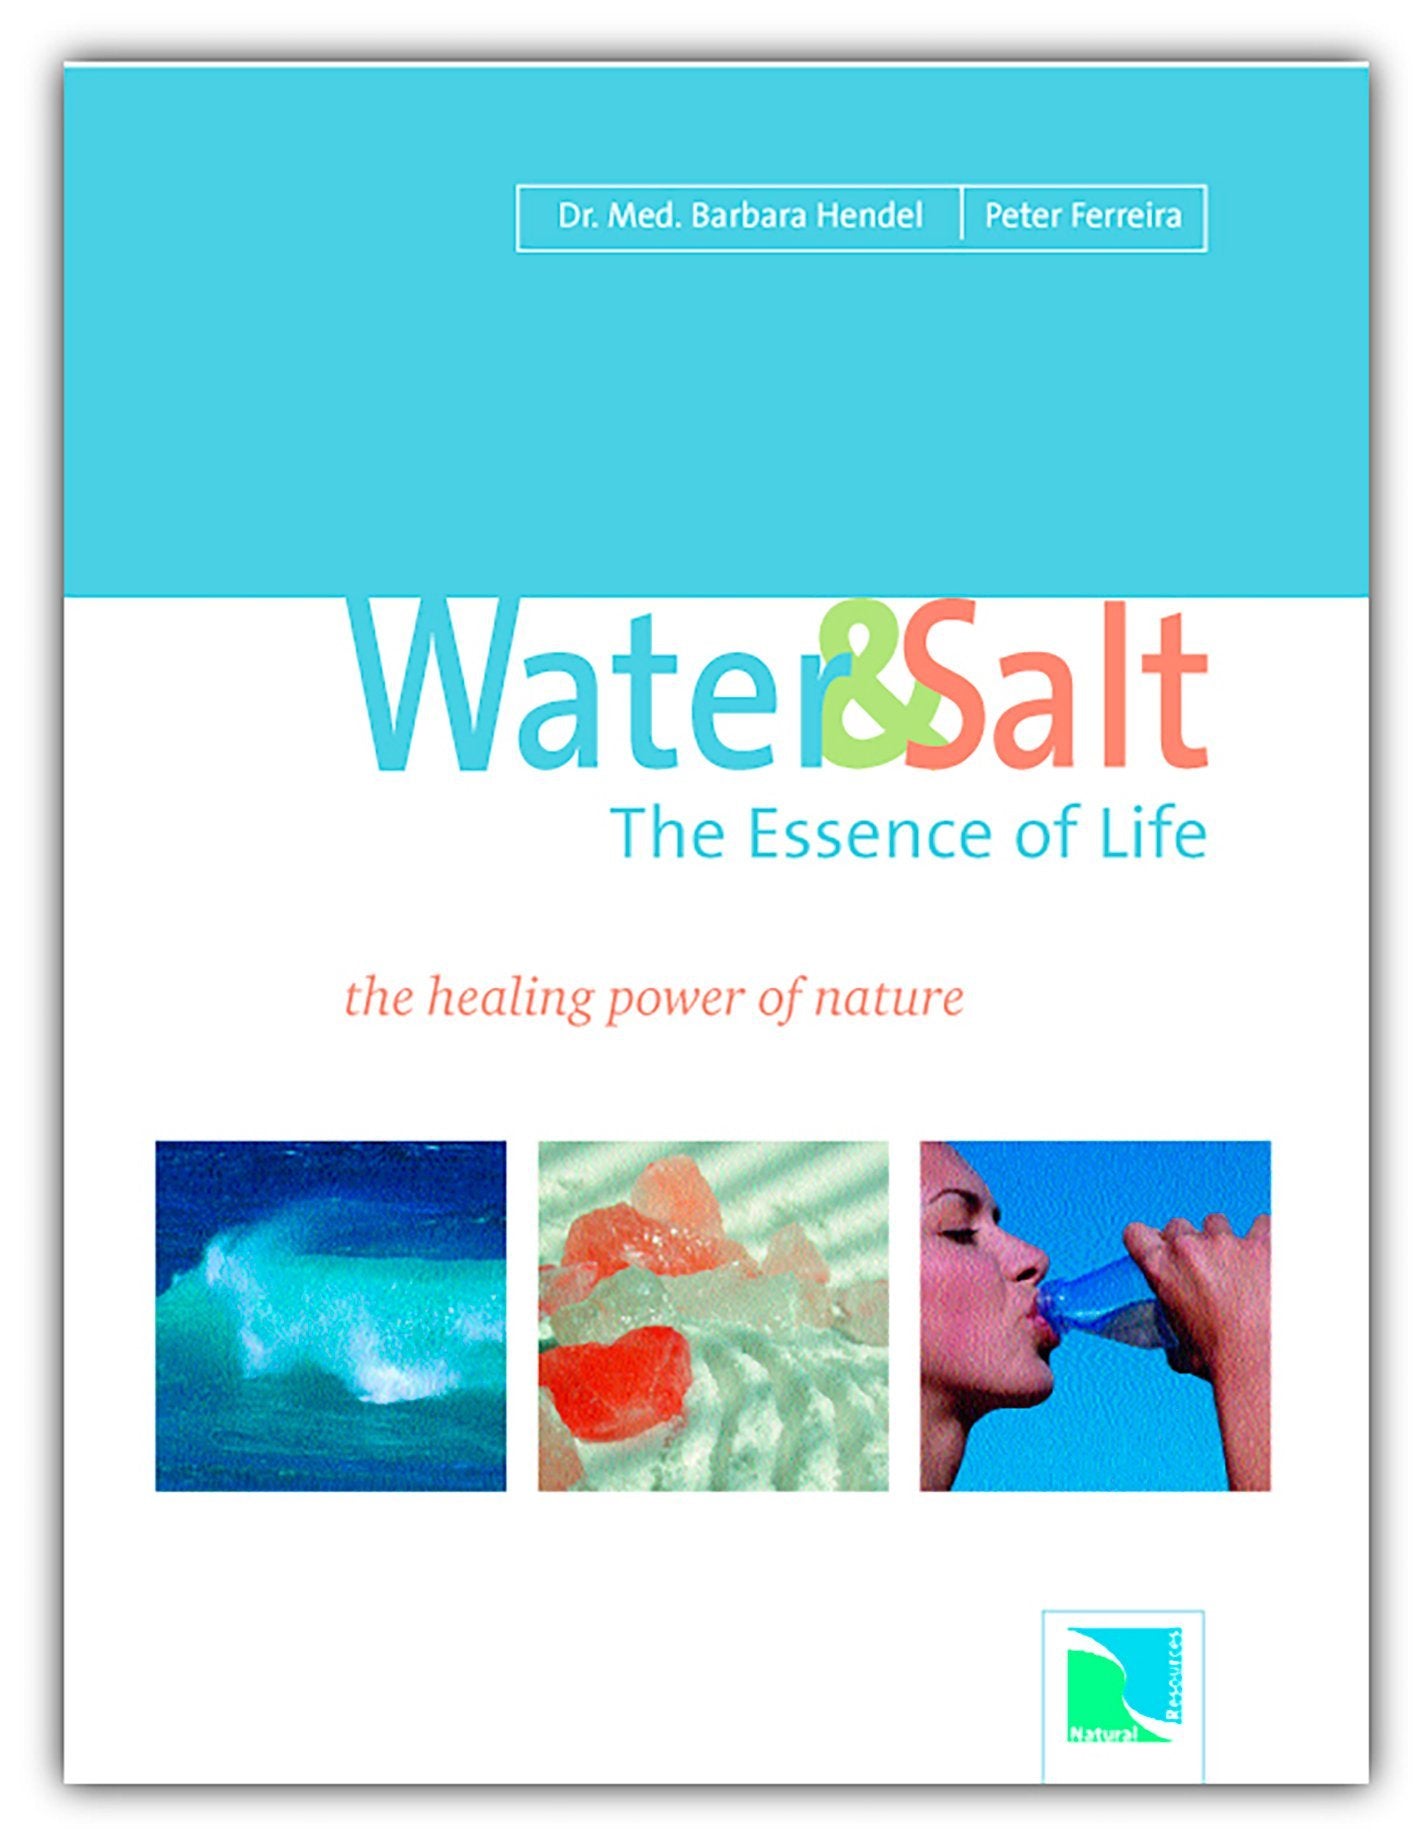 Water & Salt: the Essence of Life" by Dr. Hendel and Peter Ferreira salt book